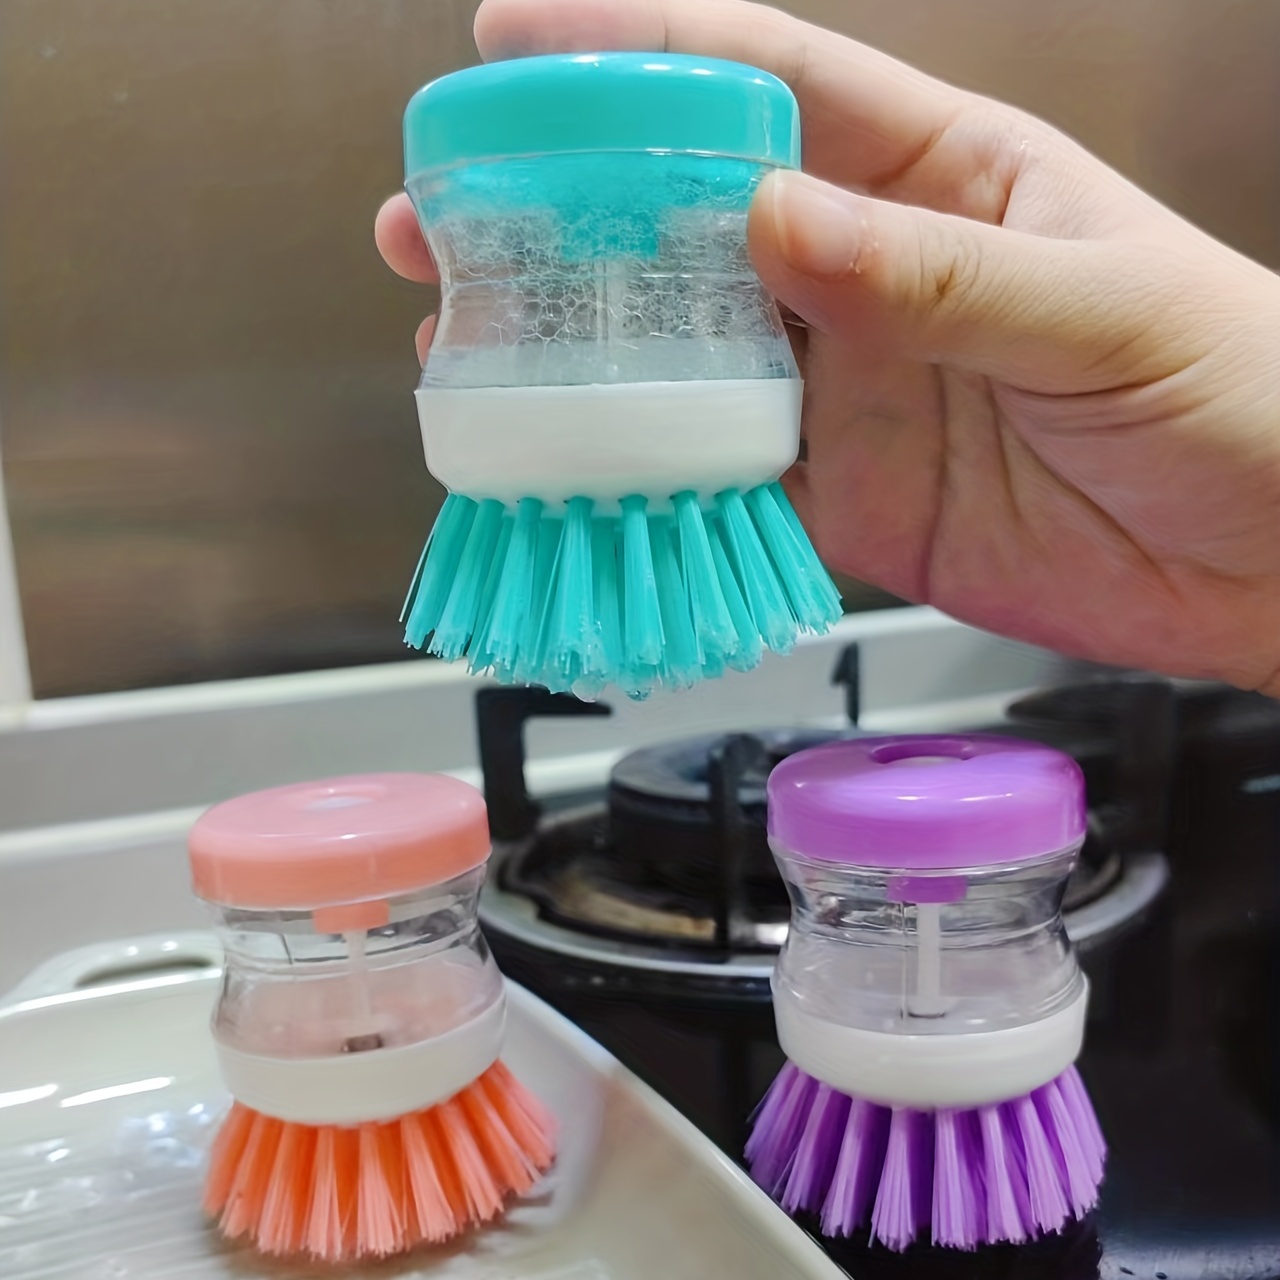 2 In 1 Automatic Liquid Adding Cleaning Brush,multifunctional